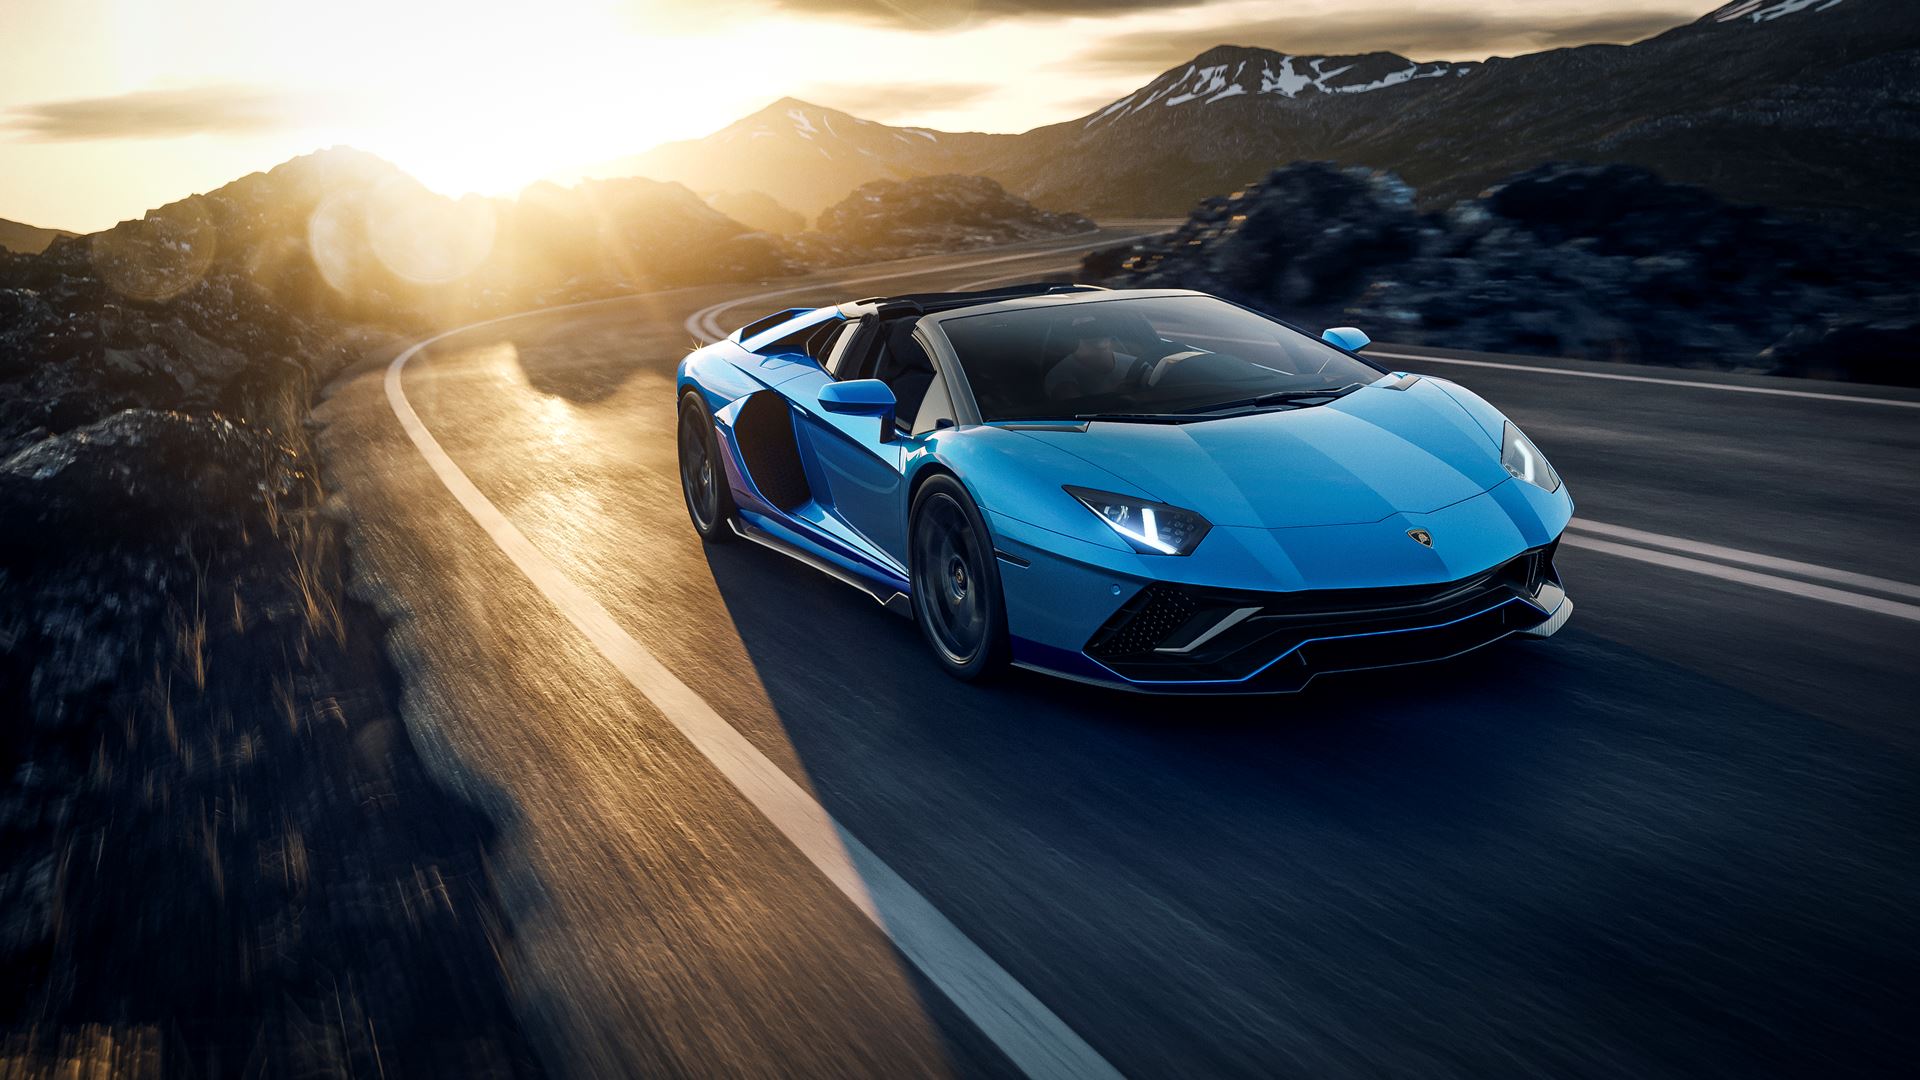 A record-breaking 2021 for Automobili Lamborghini - The company recorded its best year ever, with 8,405 cars delivered - Image 5